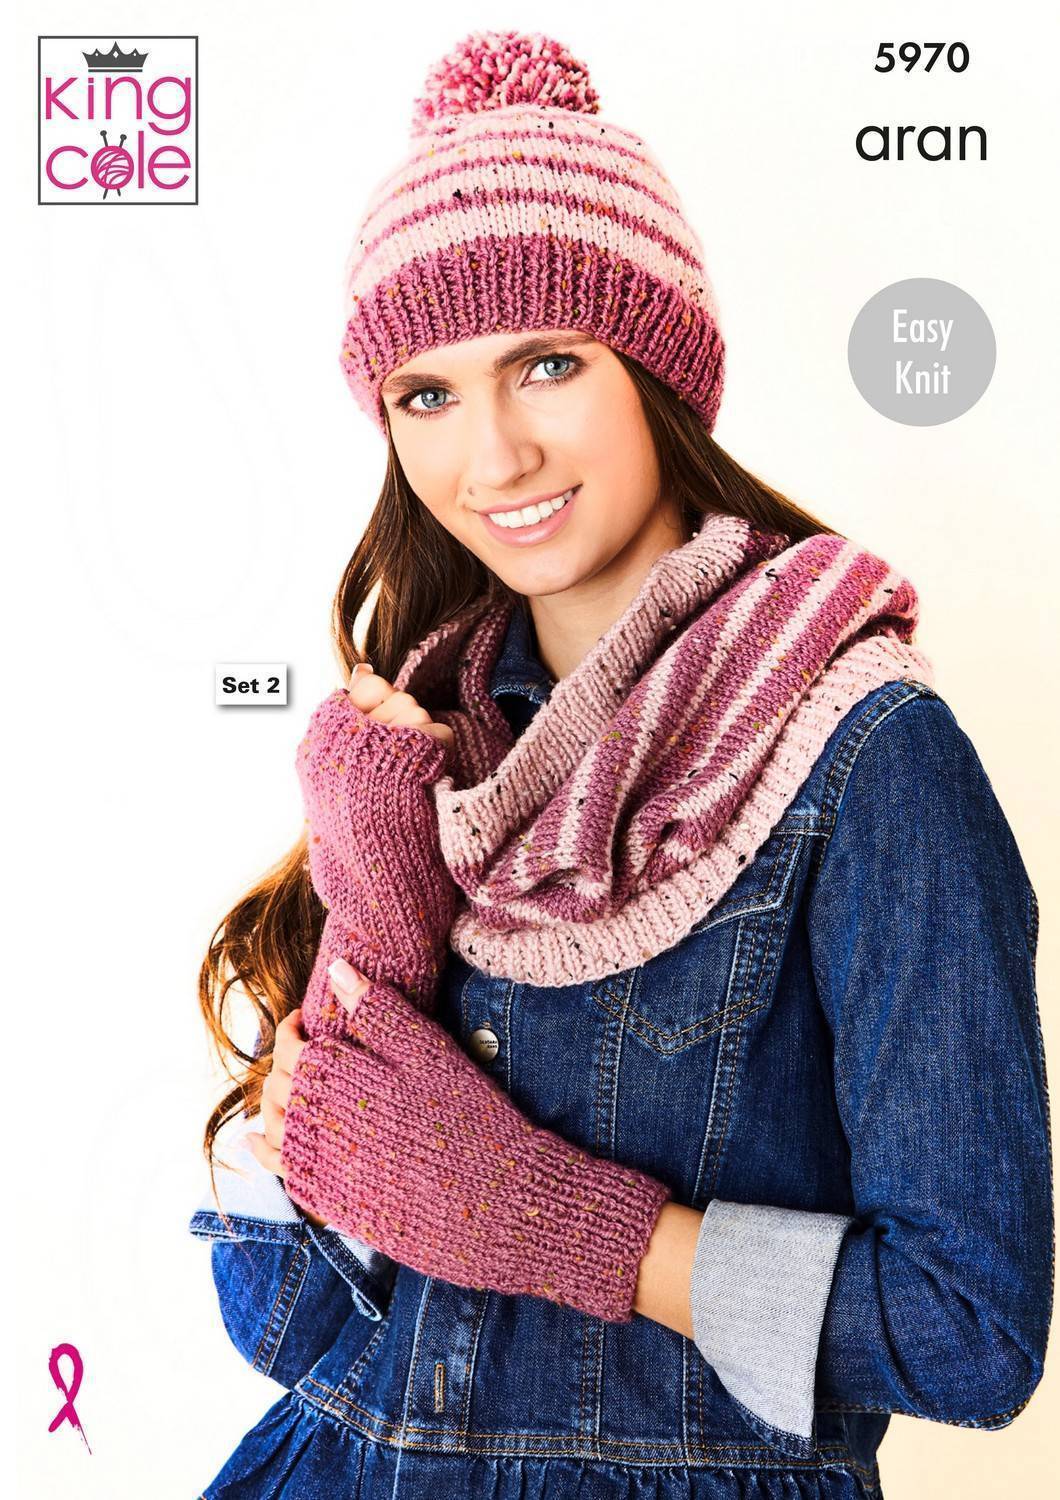 Accessories in King Cole Fashion Aran (5970) | The Knitting Network